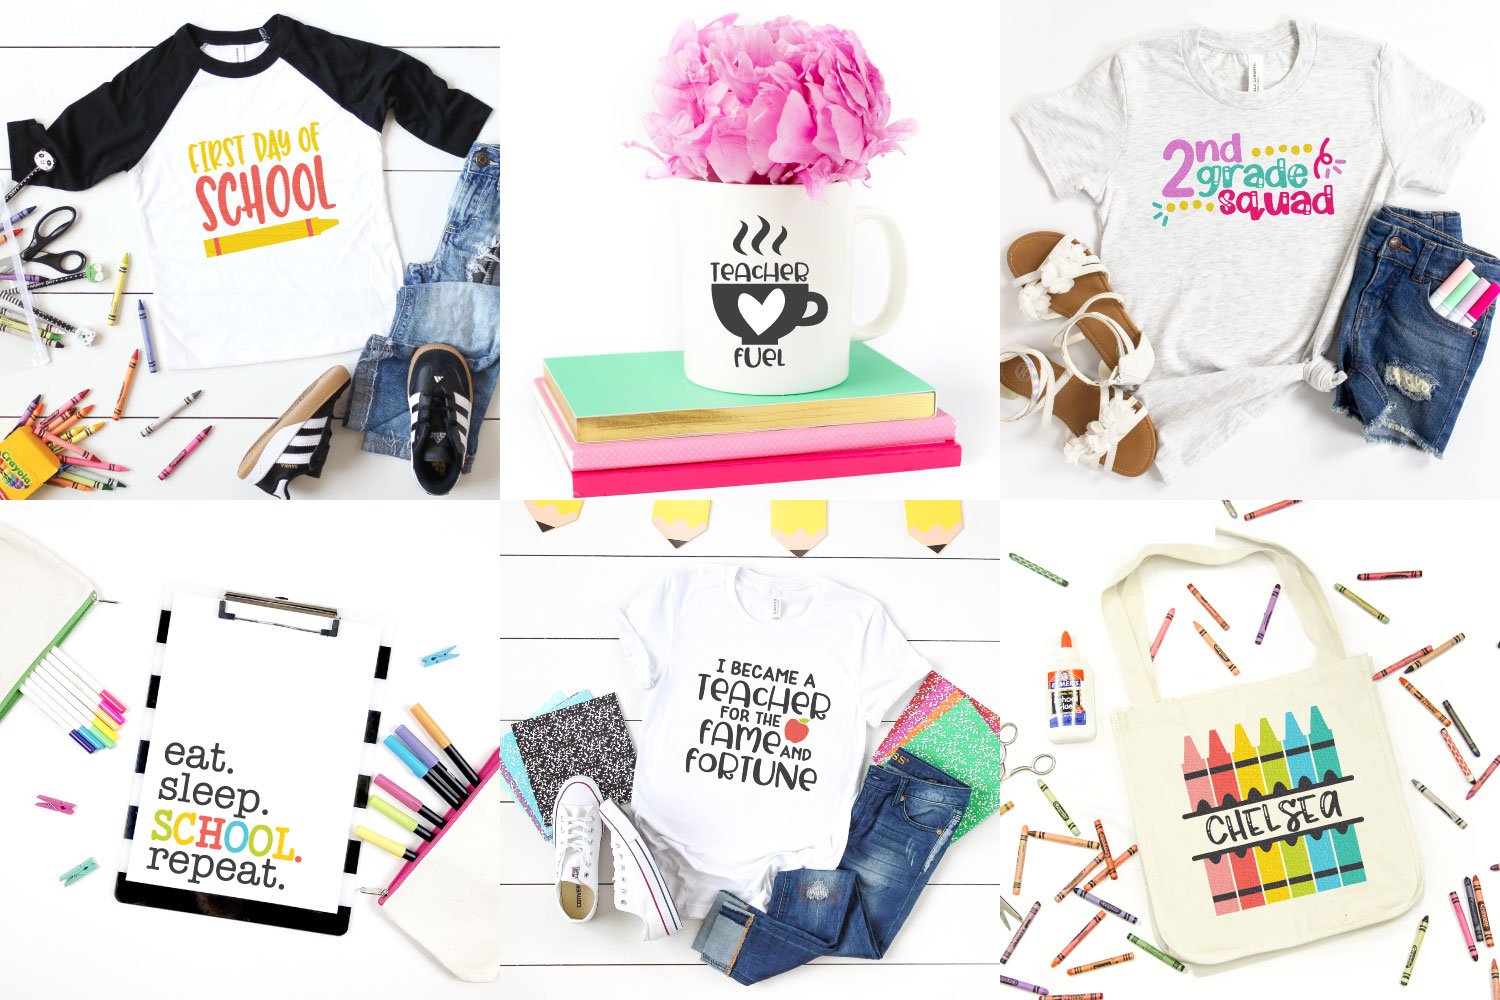 Images featuring shirts, coffee mug, canvas bag and clip board all with back-to-school themed sayings such as First Day of School, Teacher Fuel, Second Grade Squad, Eat.School.Sleep,Repeat, I Became a Teacher for the Fame and Fortune.